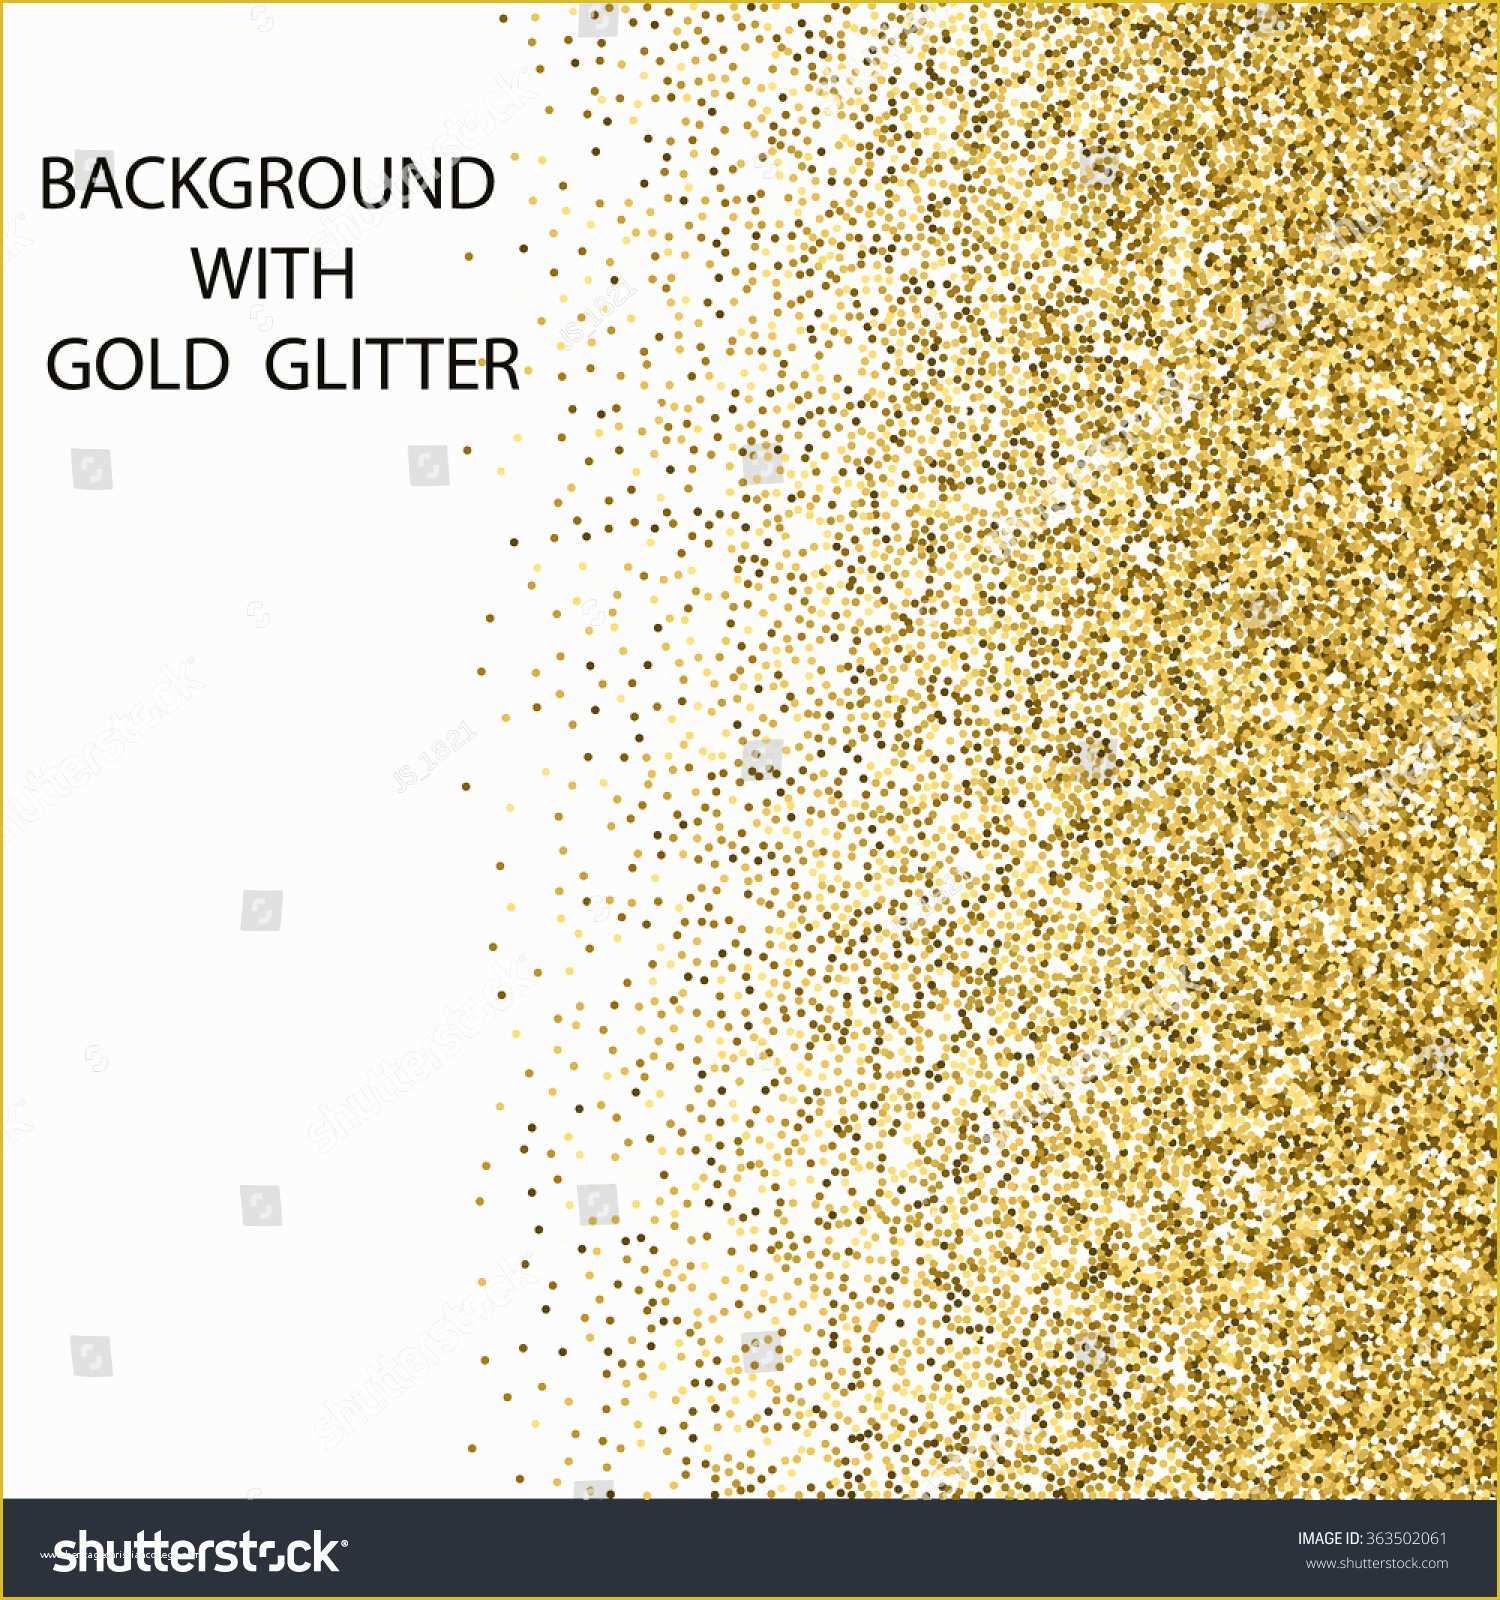 Free Glitter Invitation Template Of Abstract Background Gold Glitter Vector Illustration Stock